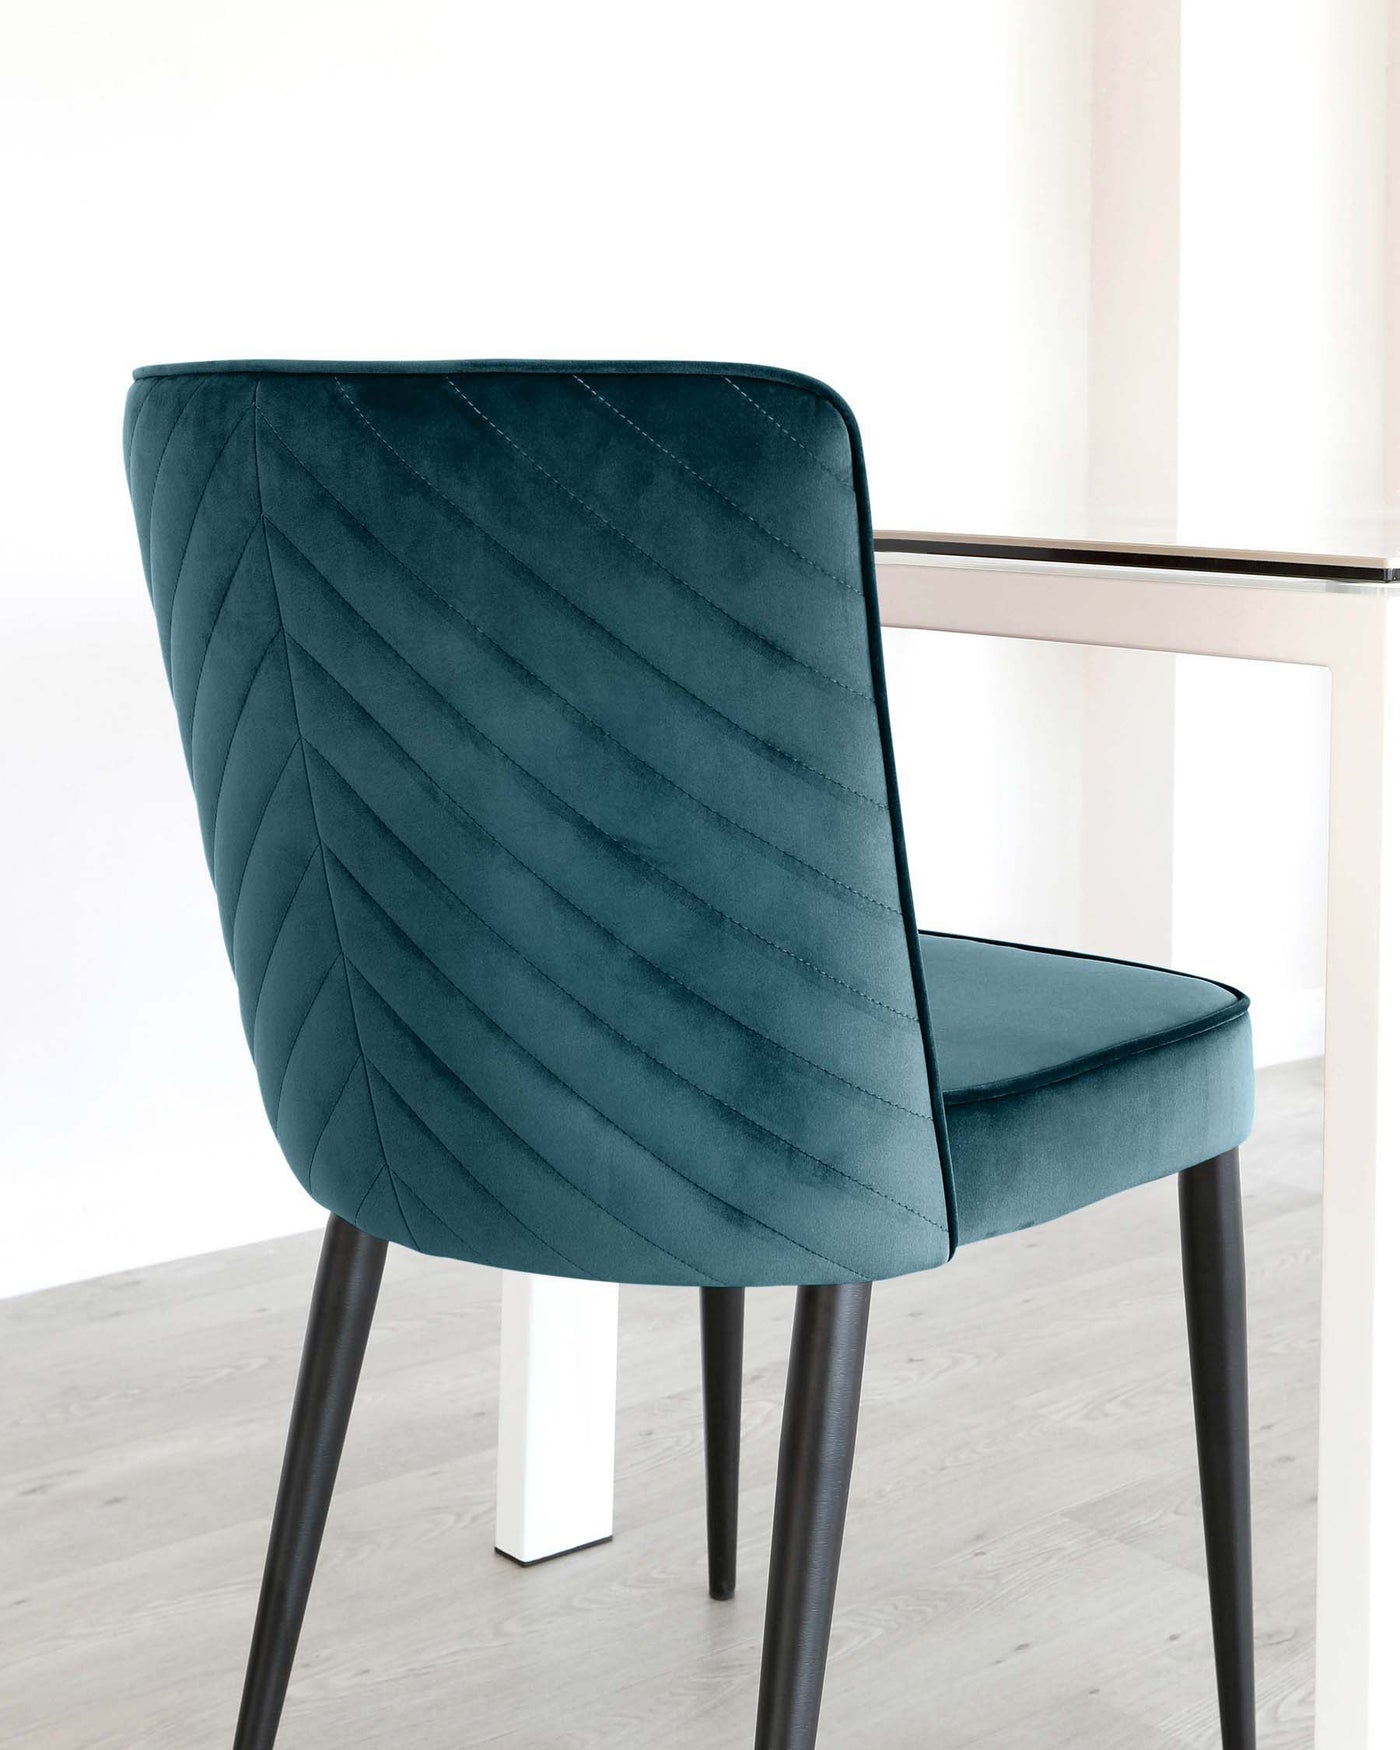 Elegant teal upholstered dining chair with a quilted backrest pattern, featuring black metal legs and a comfortable, curvaceous silhouette.